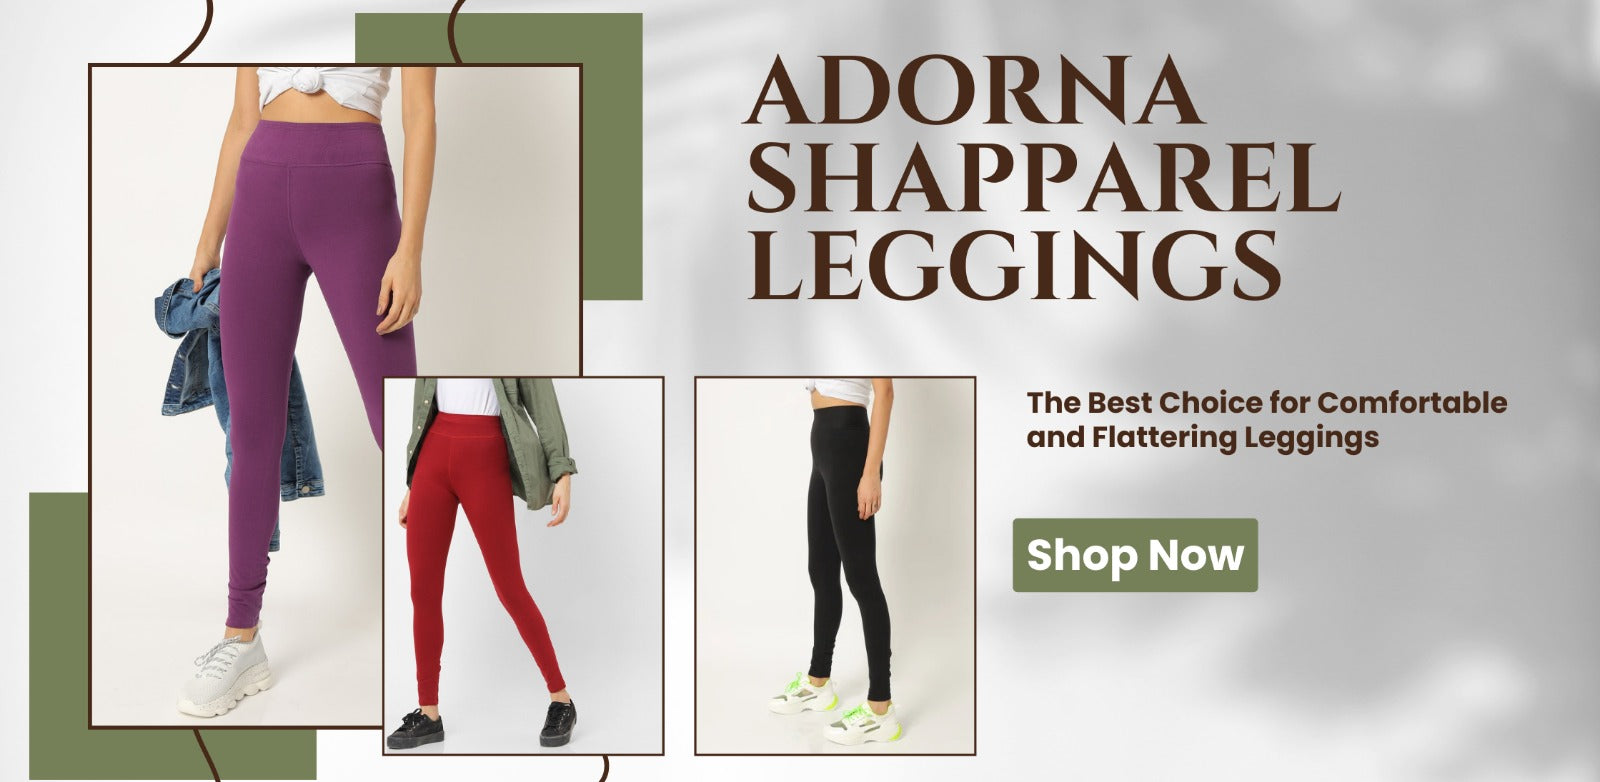 Adorna Shapparel Leggings: The Best Choice for Comfortable and Flatter